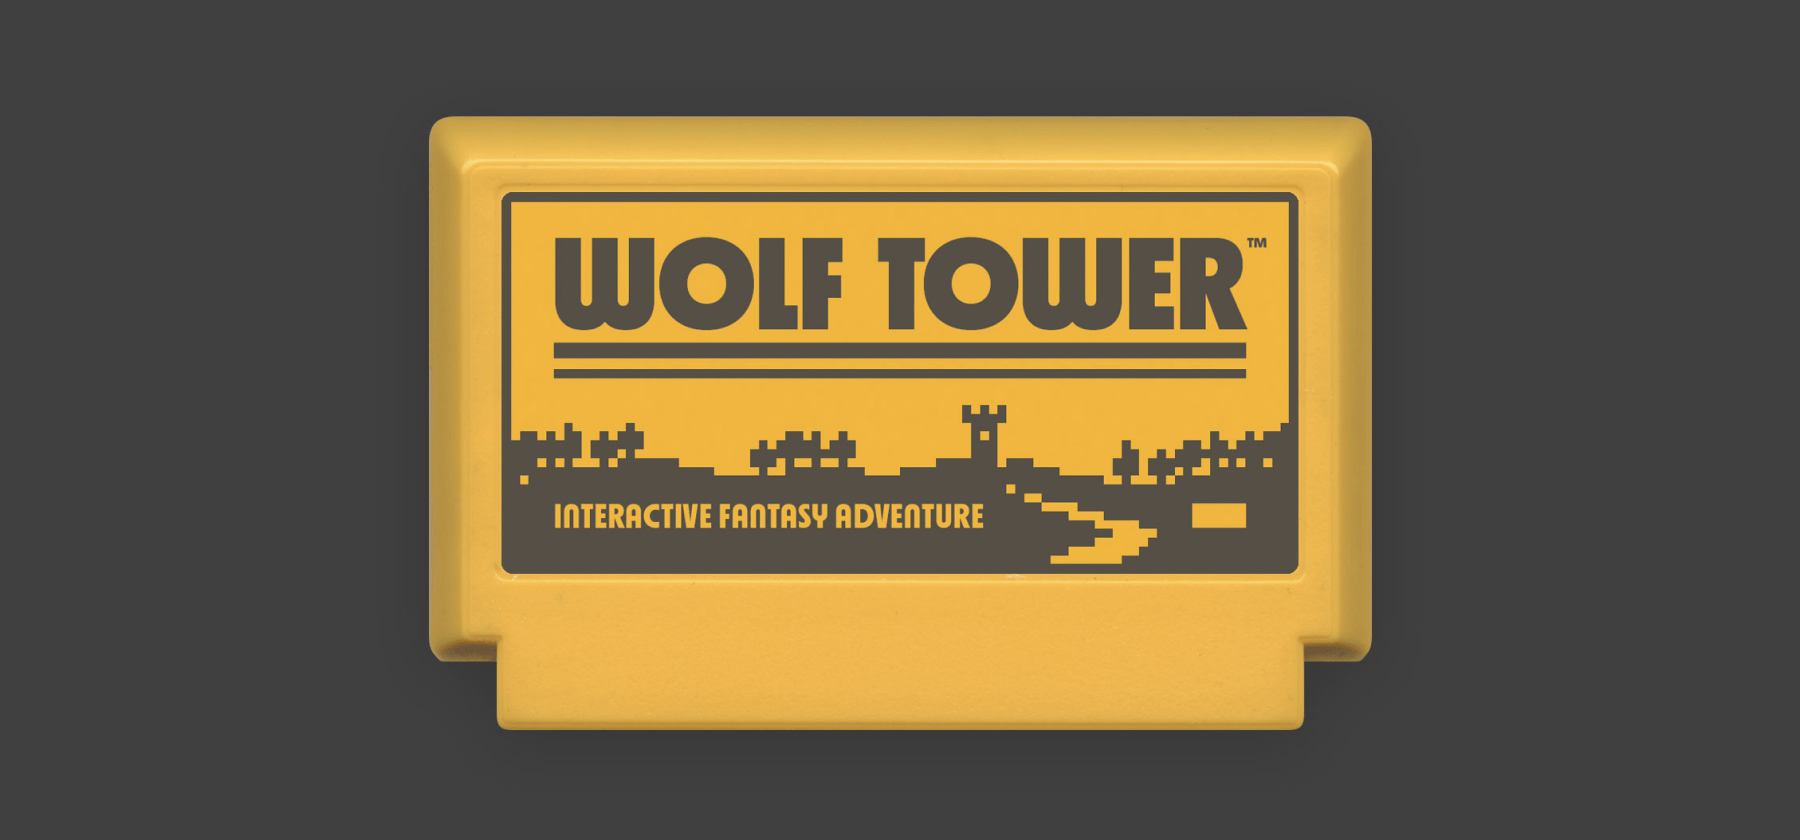 Wolf Tower Famicase cart